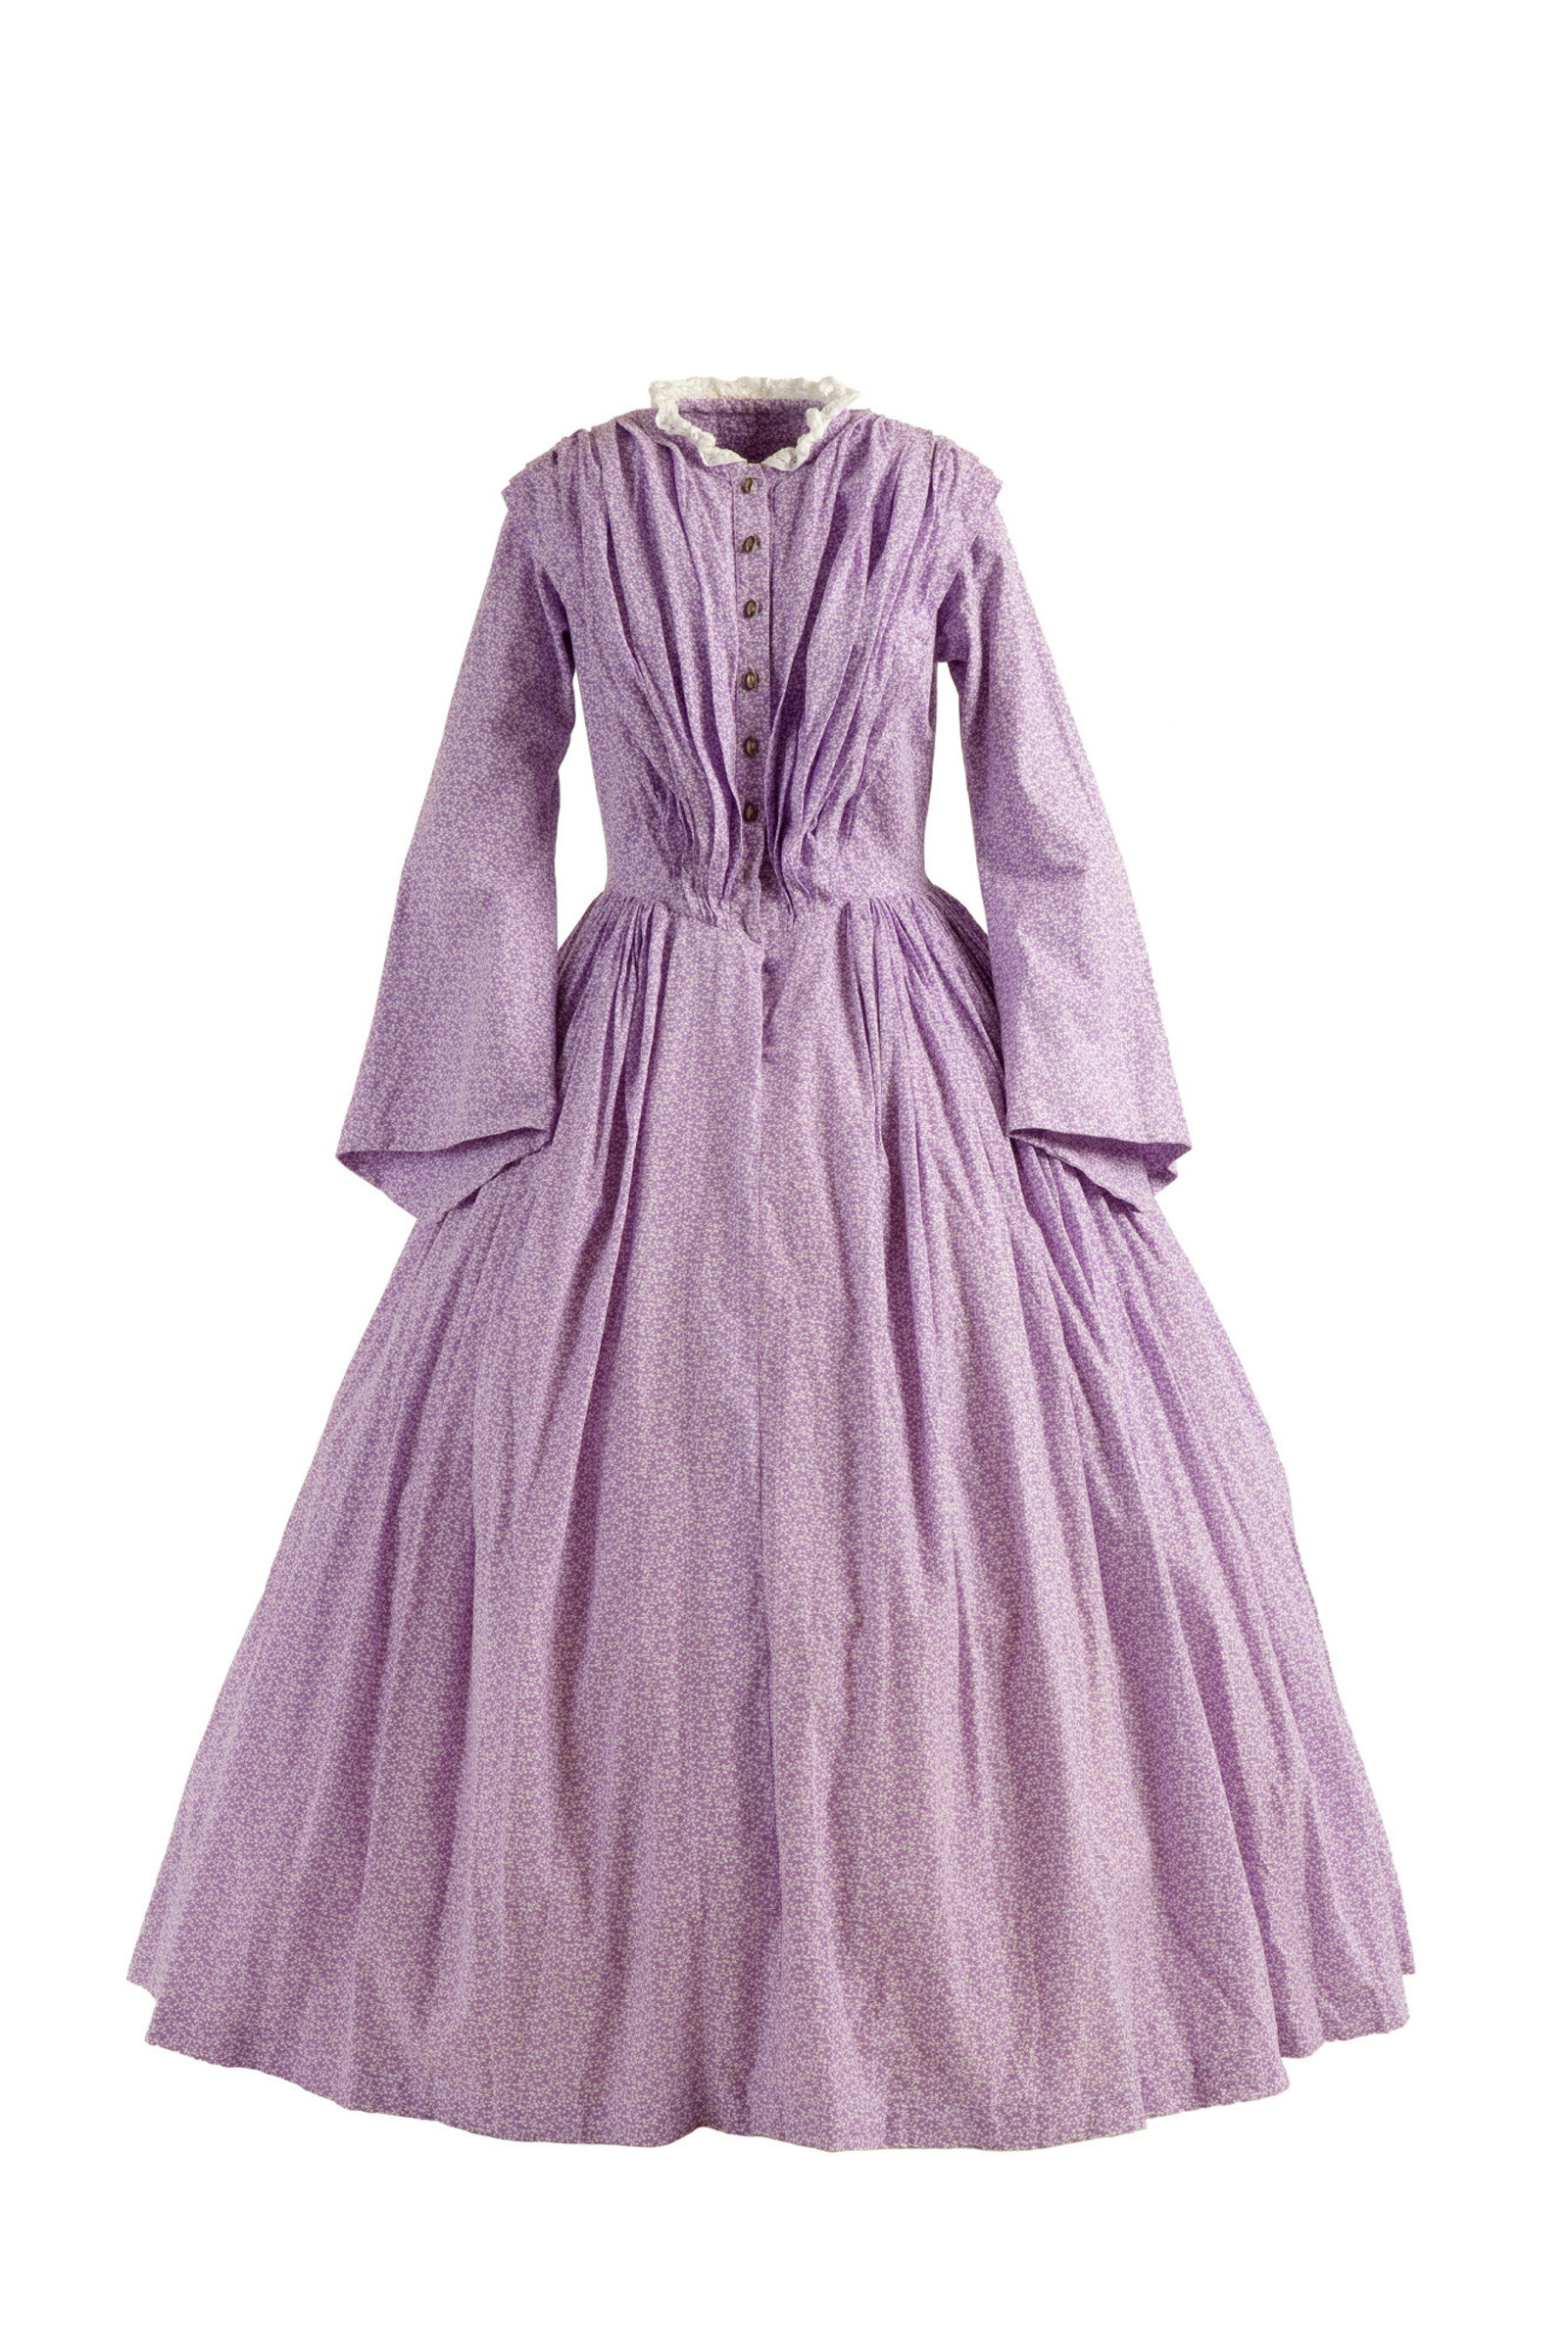 Mauve dress with plain, front-buttoning fitted bodice with a small, high collar, bell-shaped skirt worn over petticoats, and loose-fitting or frilled sleeves that could be rolled up.